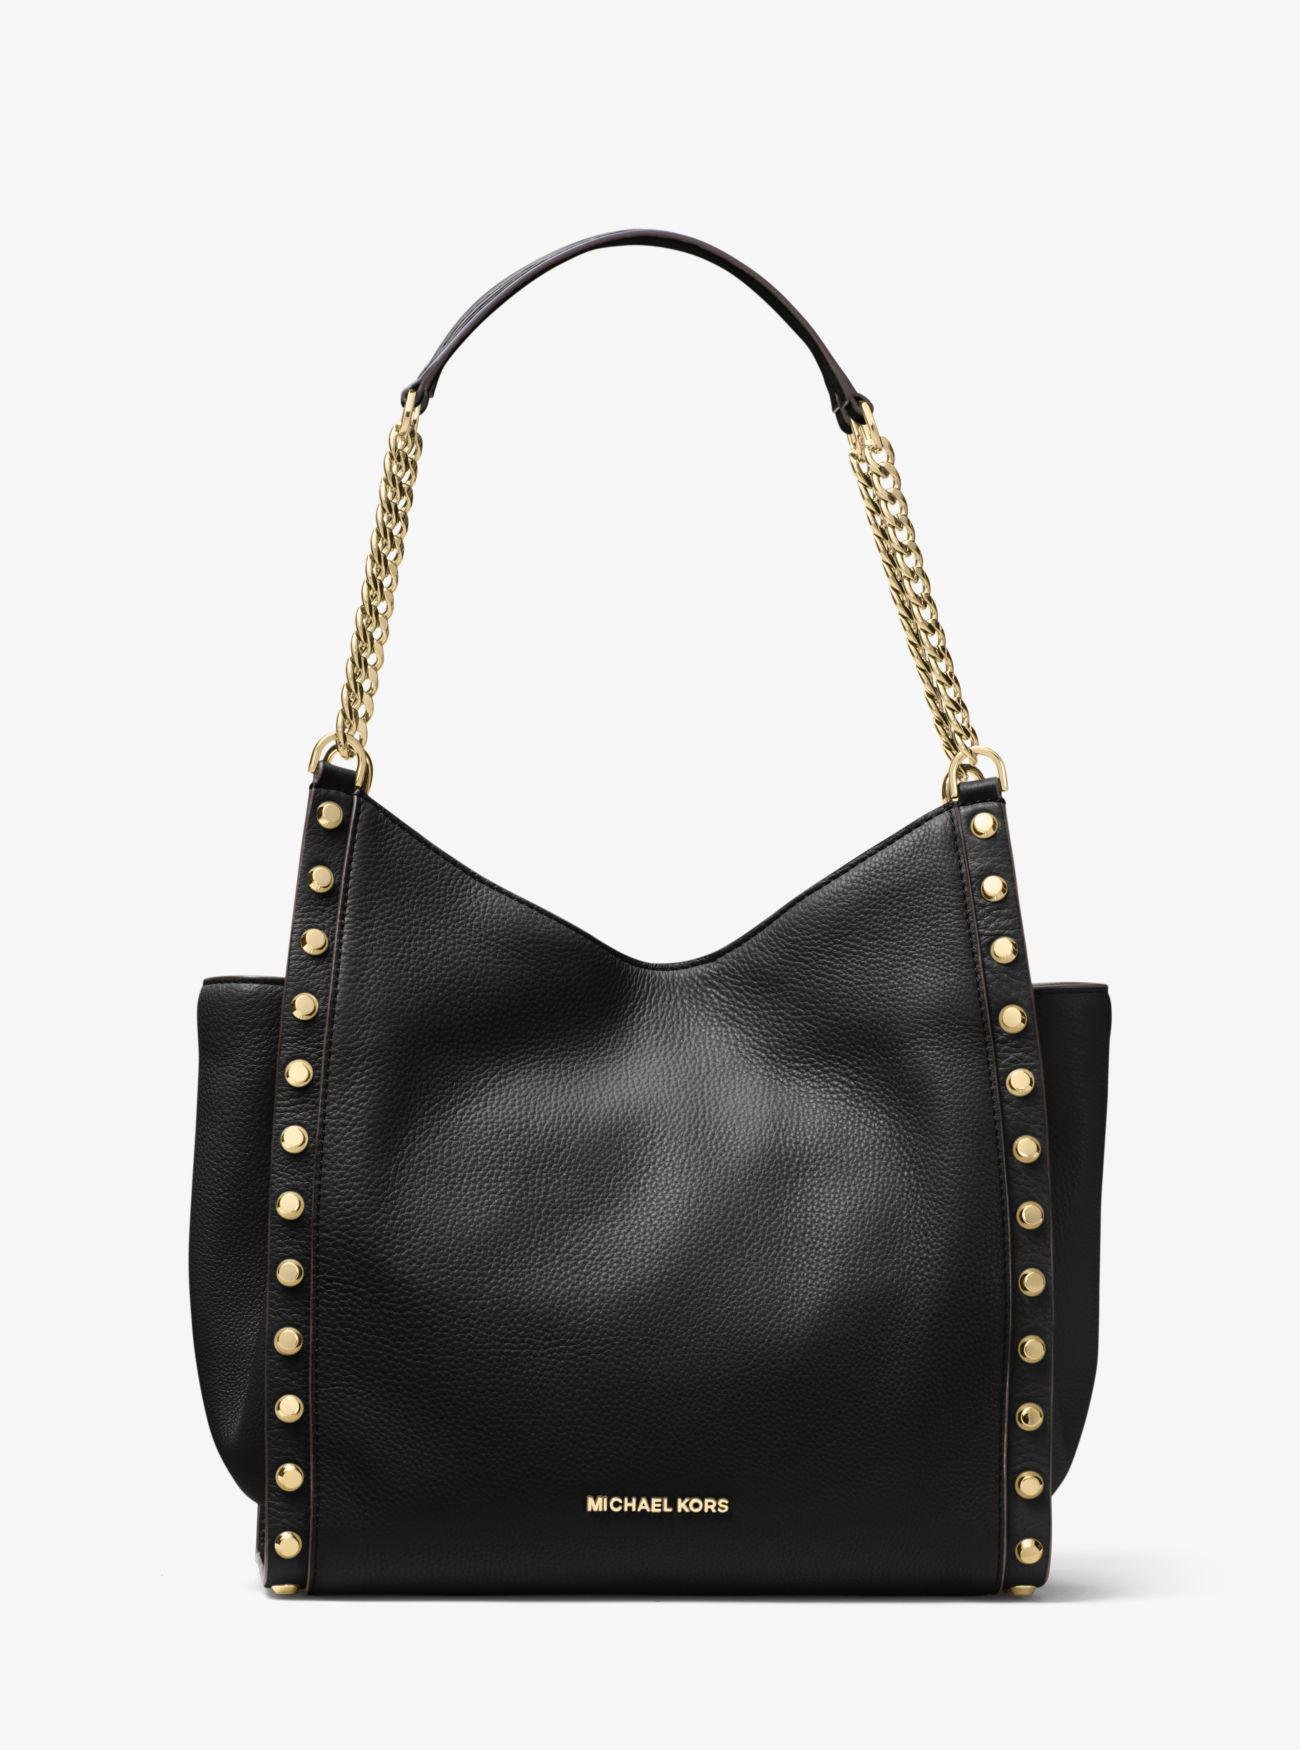 Lyst - Michael Kors Newbury Studded Leather Chain Tote Bag in Black